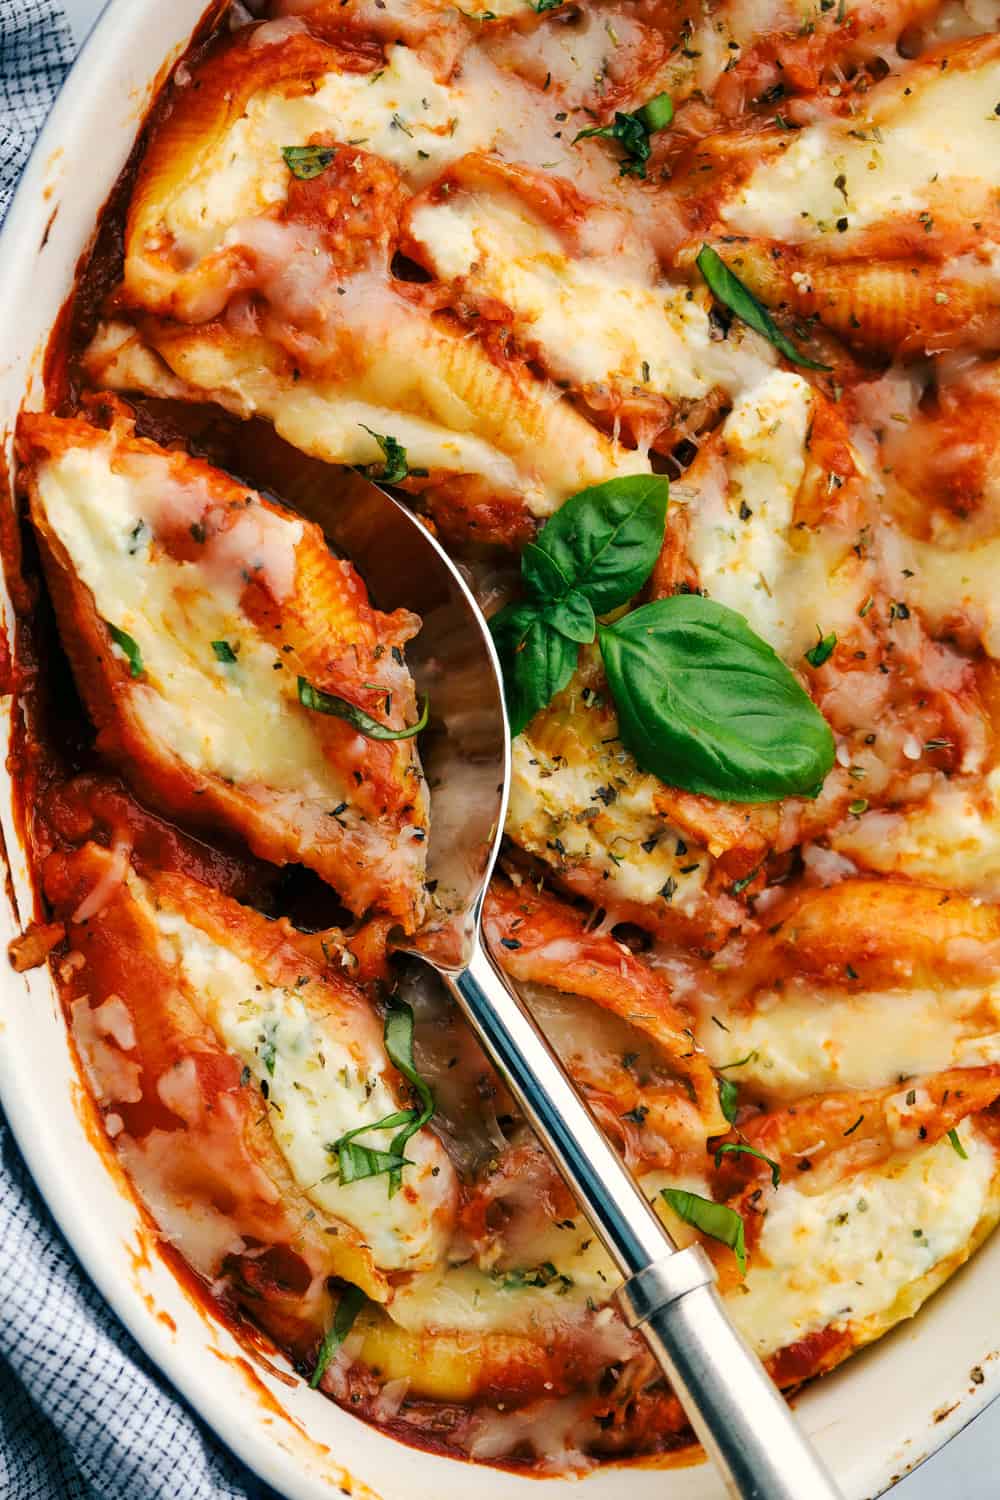 Three cheese stuffed shells baked in a pan with a spoon.